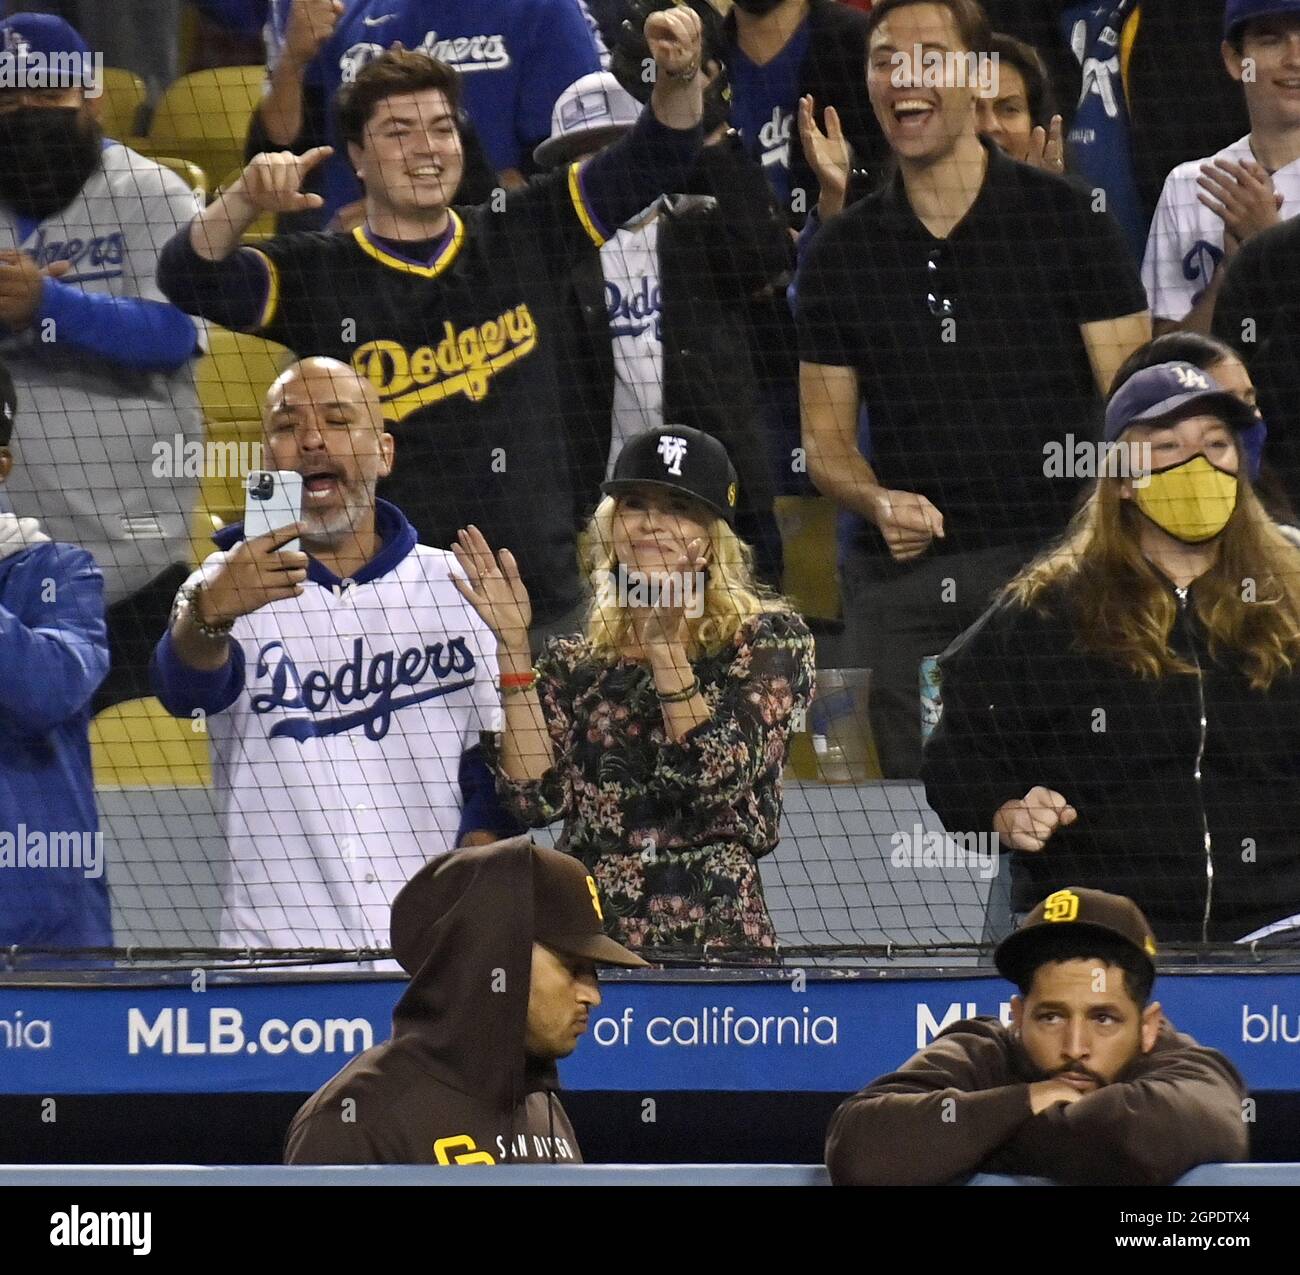 Los Angeles, USA. 29th Sep, 2021. Actress Chelsea Handler and her boyfriend Jo Koy attend the Los Angeles Dodgers game against the San Diego Padres at Dodger Stadium in Los Angeles on Tuesday, September 28, 2021. The Dodgers defeated the Padres 2-1 behind seven shutout innings from Walker Buehler. Photo by Jim Ruymen/UPI Credit: UPI/Alamy Live News Stock Photo